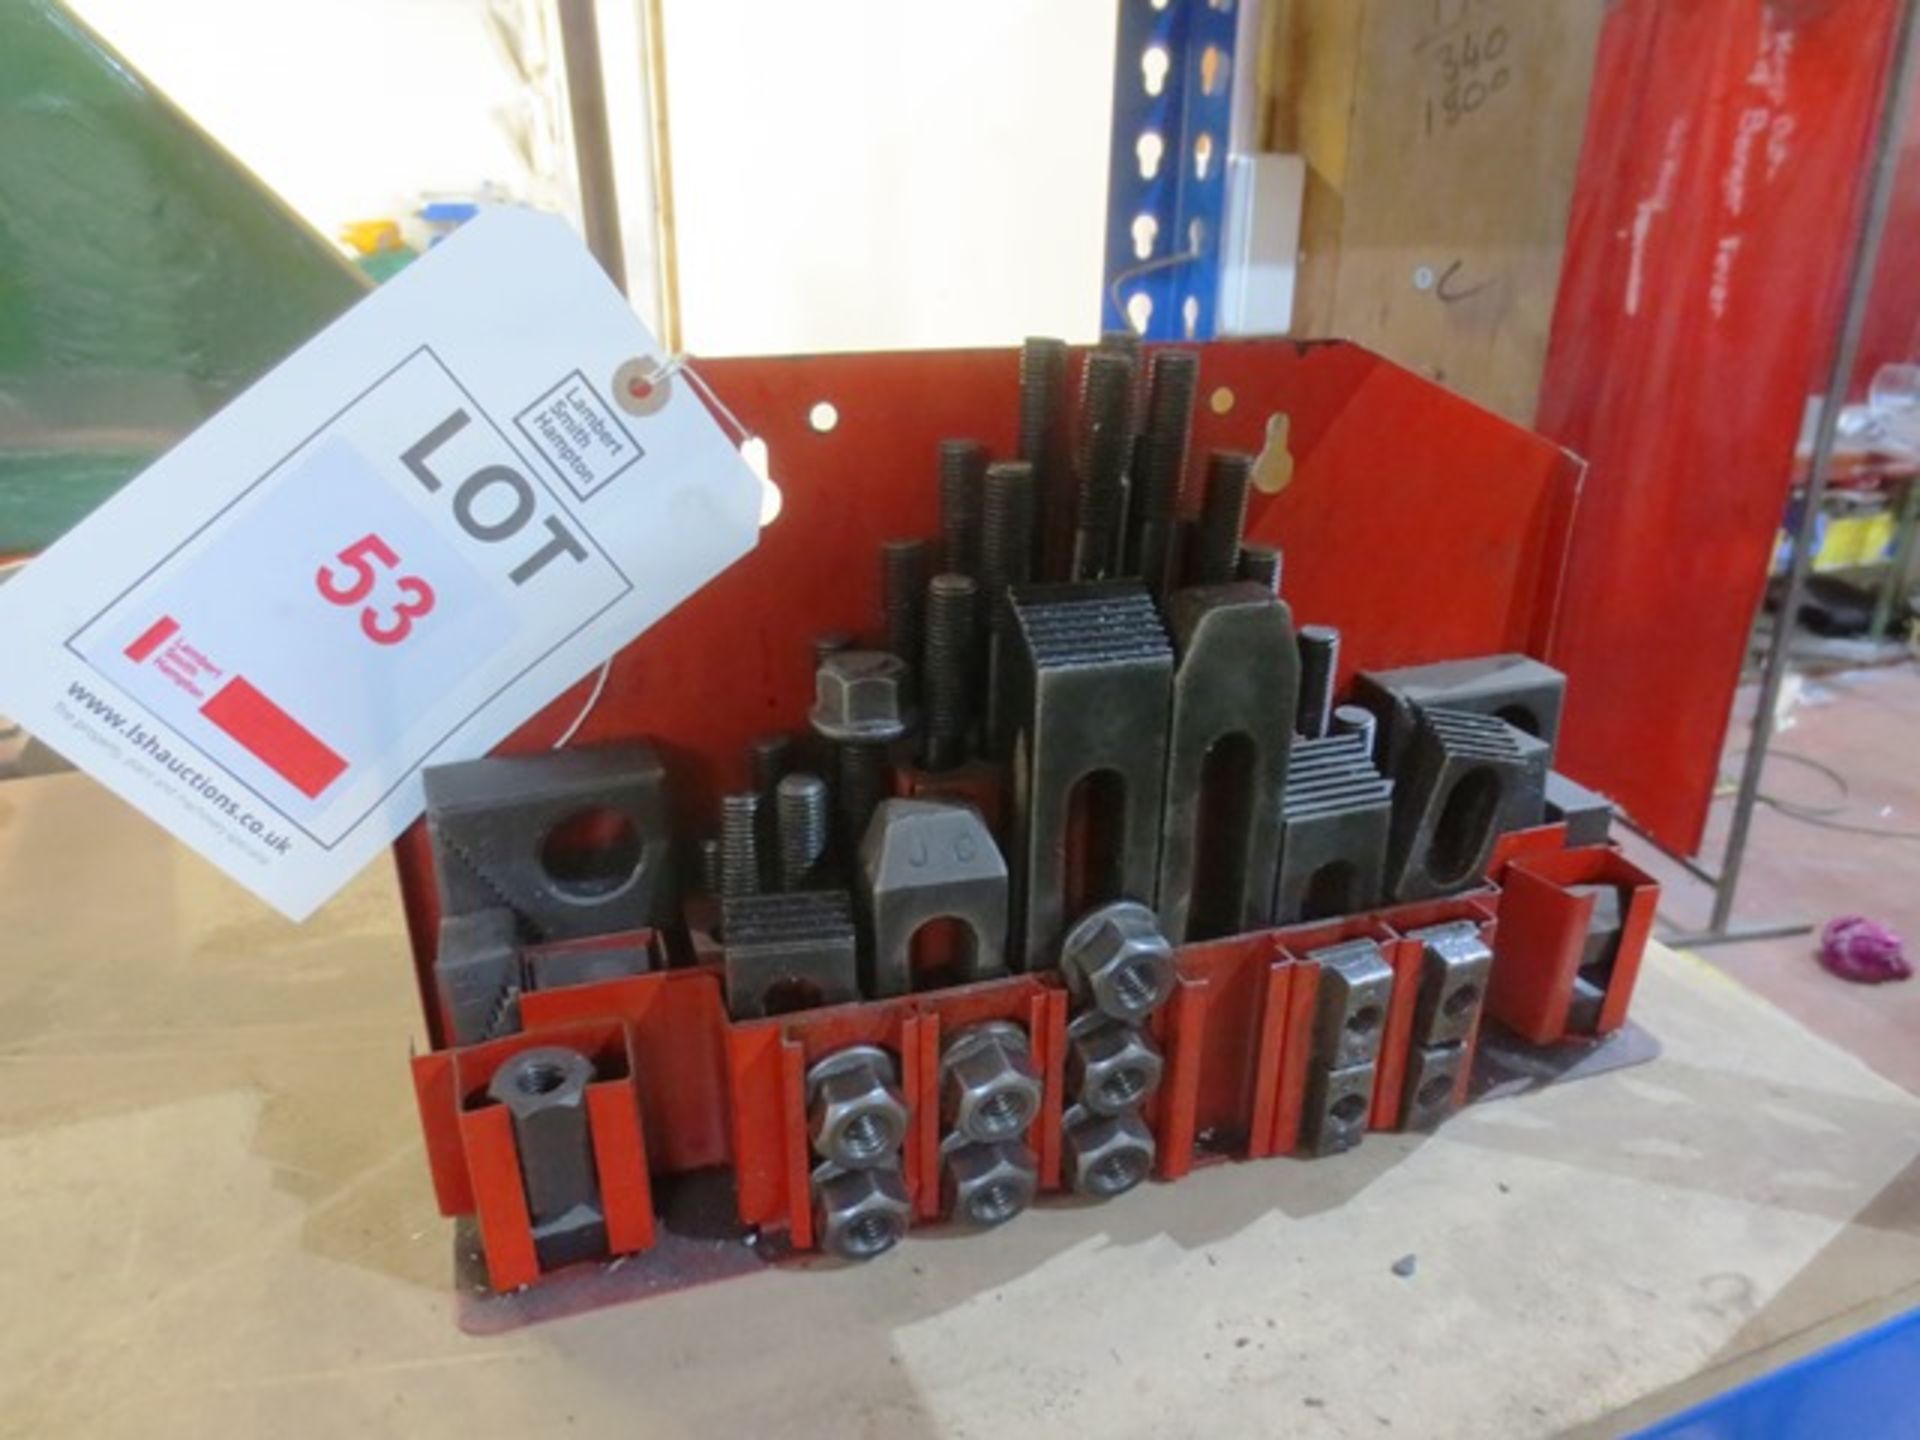 Engineer's clamping kit